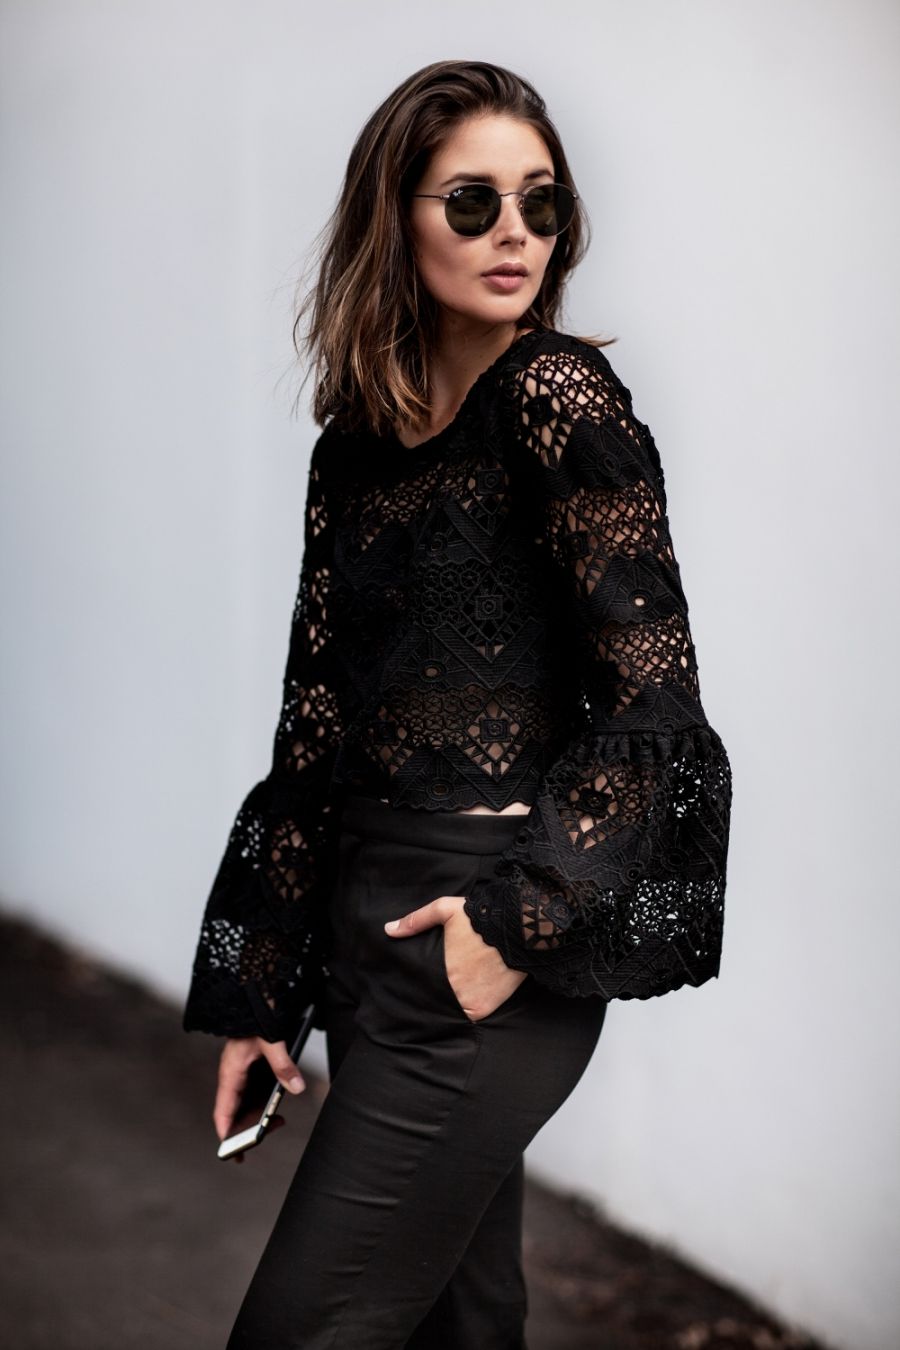 How To Wear Black Lace Shirt